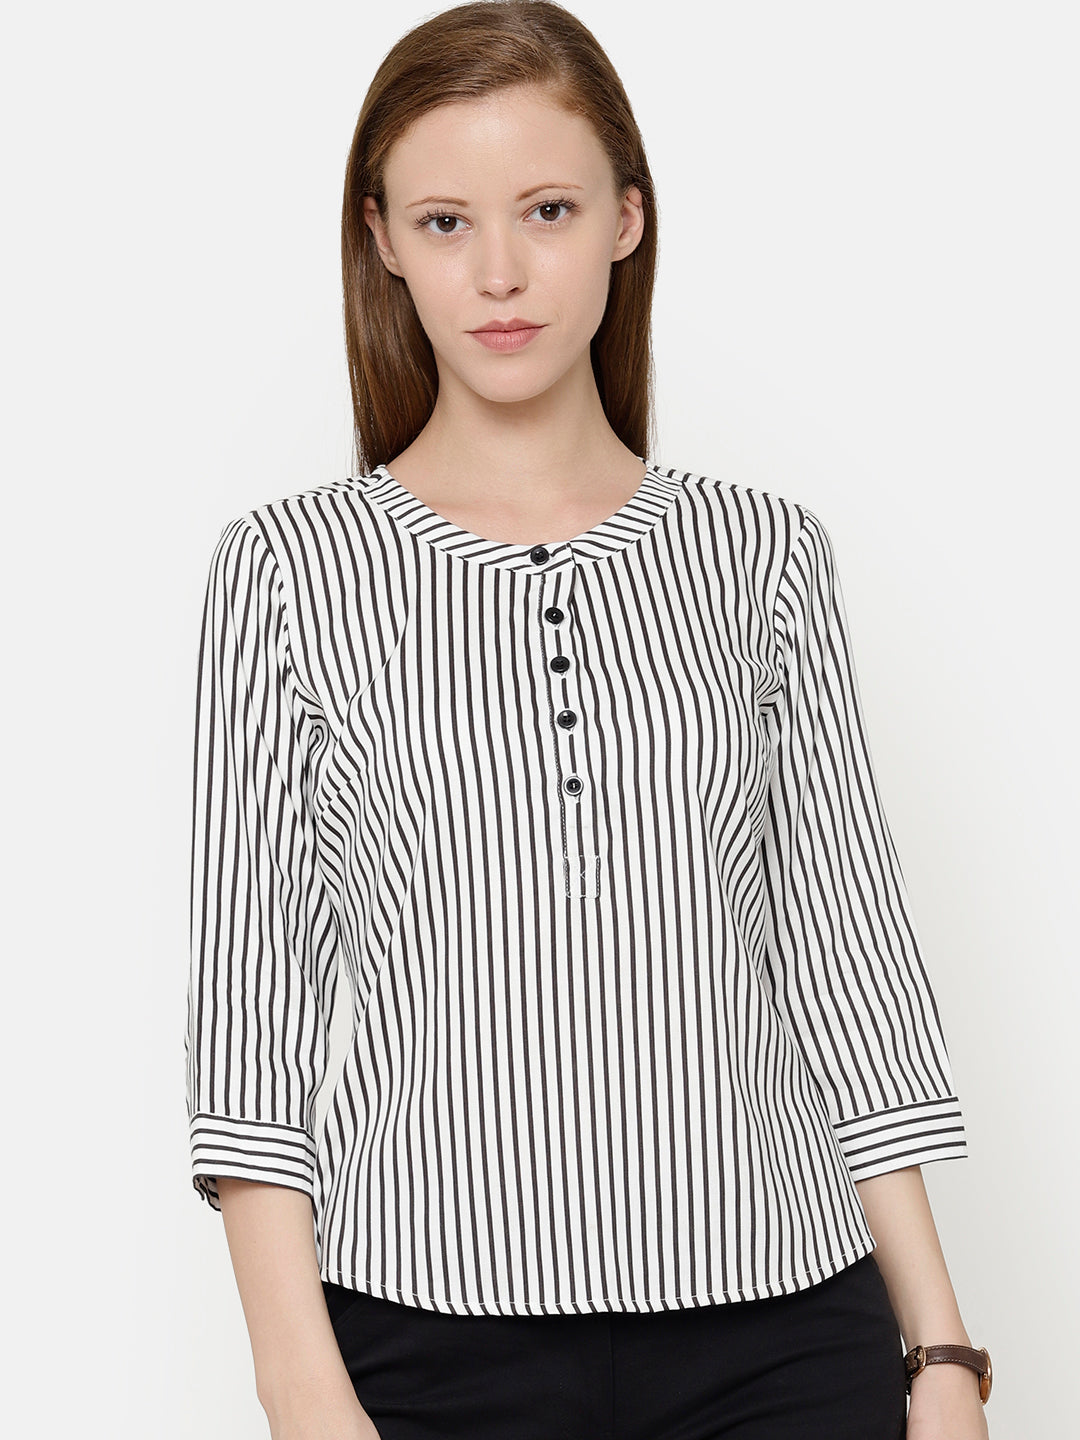 The Work Label - Black and white Stripes Round Neck Top - Women's western work-wear in India